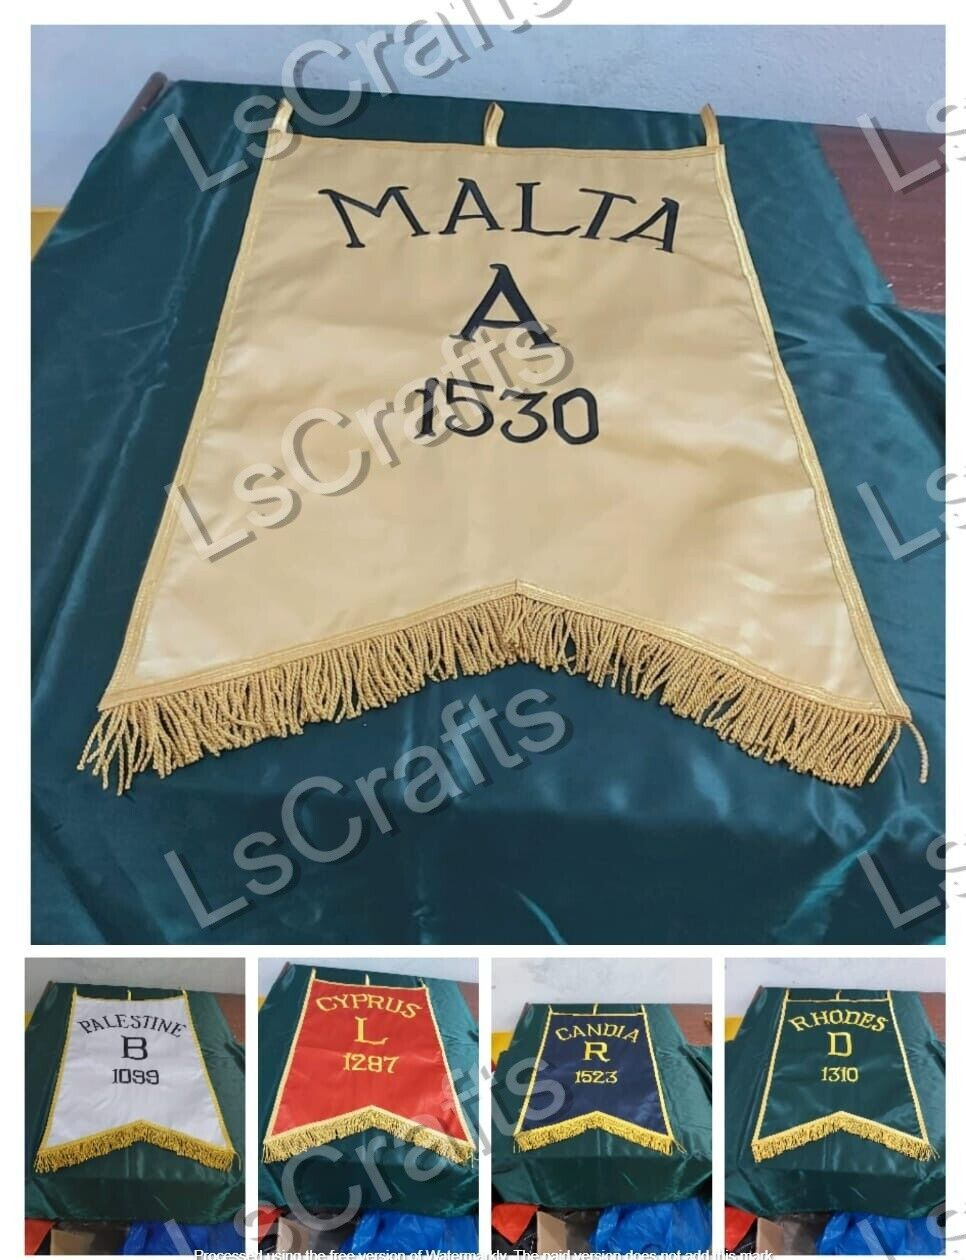 Masonic Order Of Malta Station Banners (B-L-D-R-A) Machine Embroidered Set Of 5